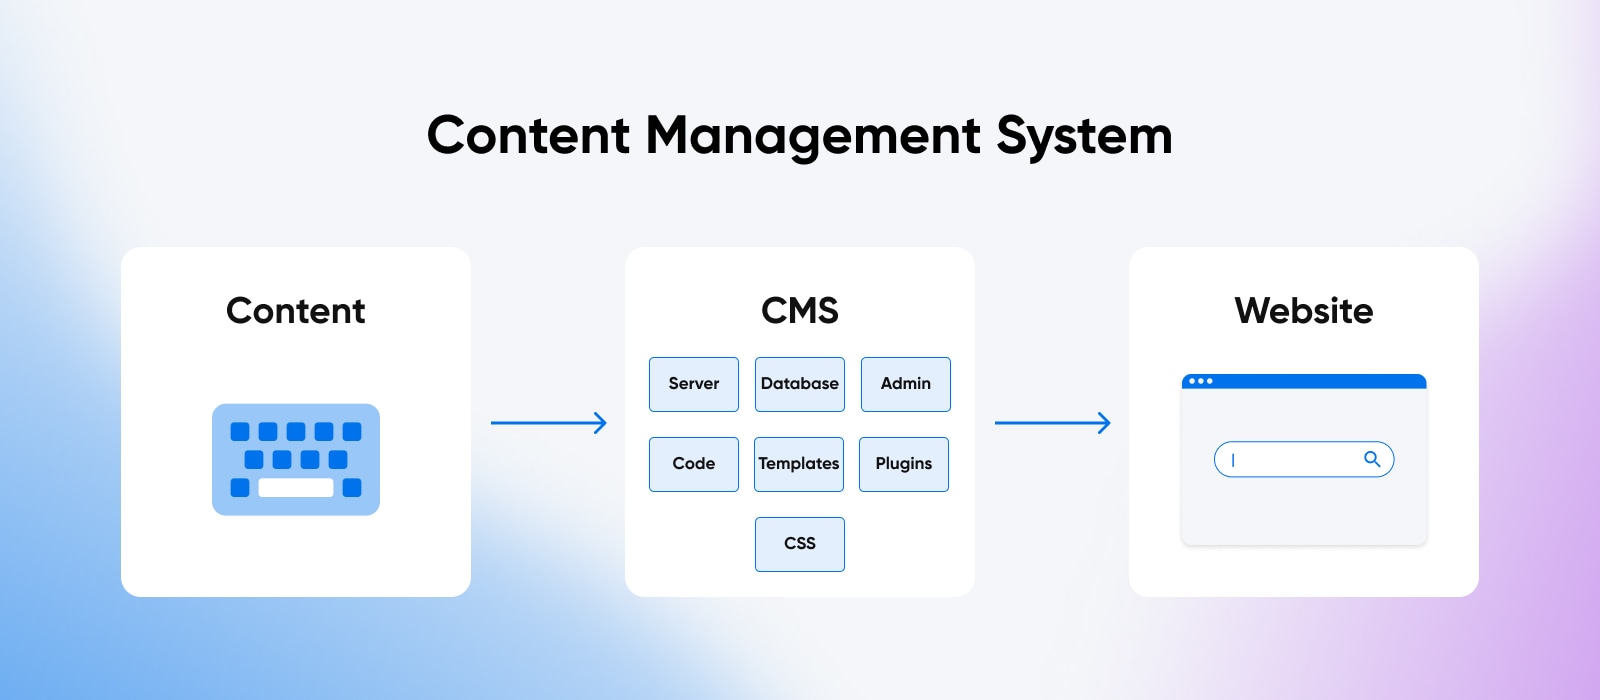 Definition of Content Management System